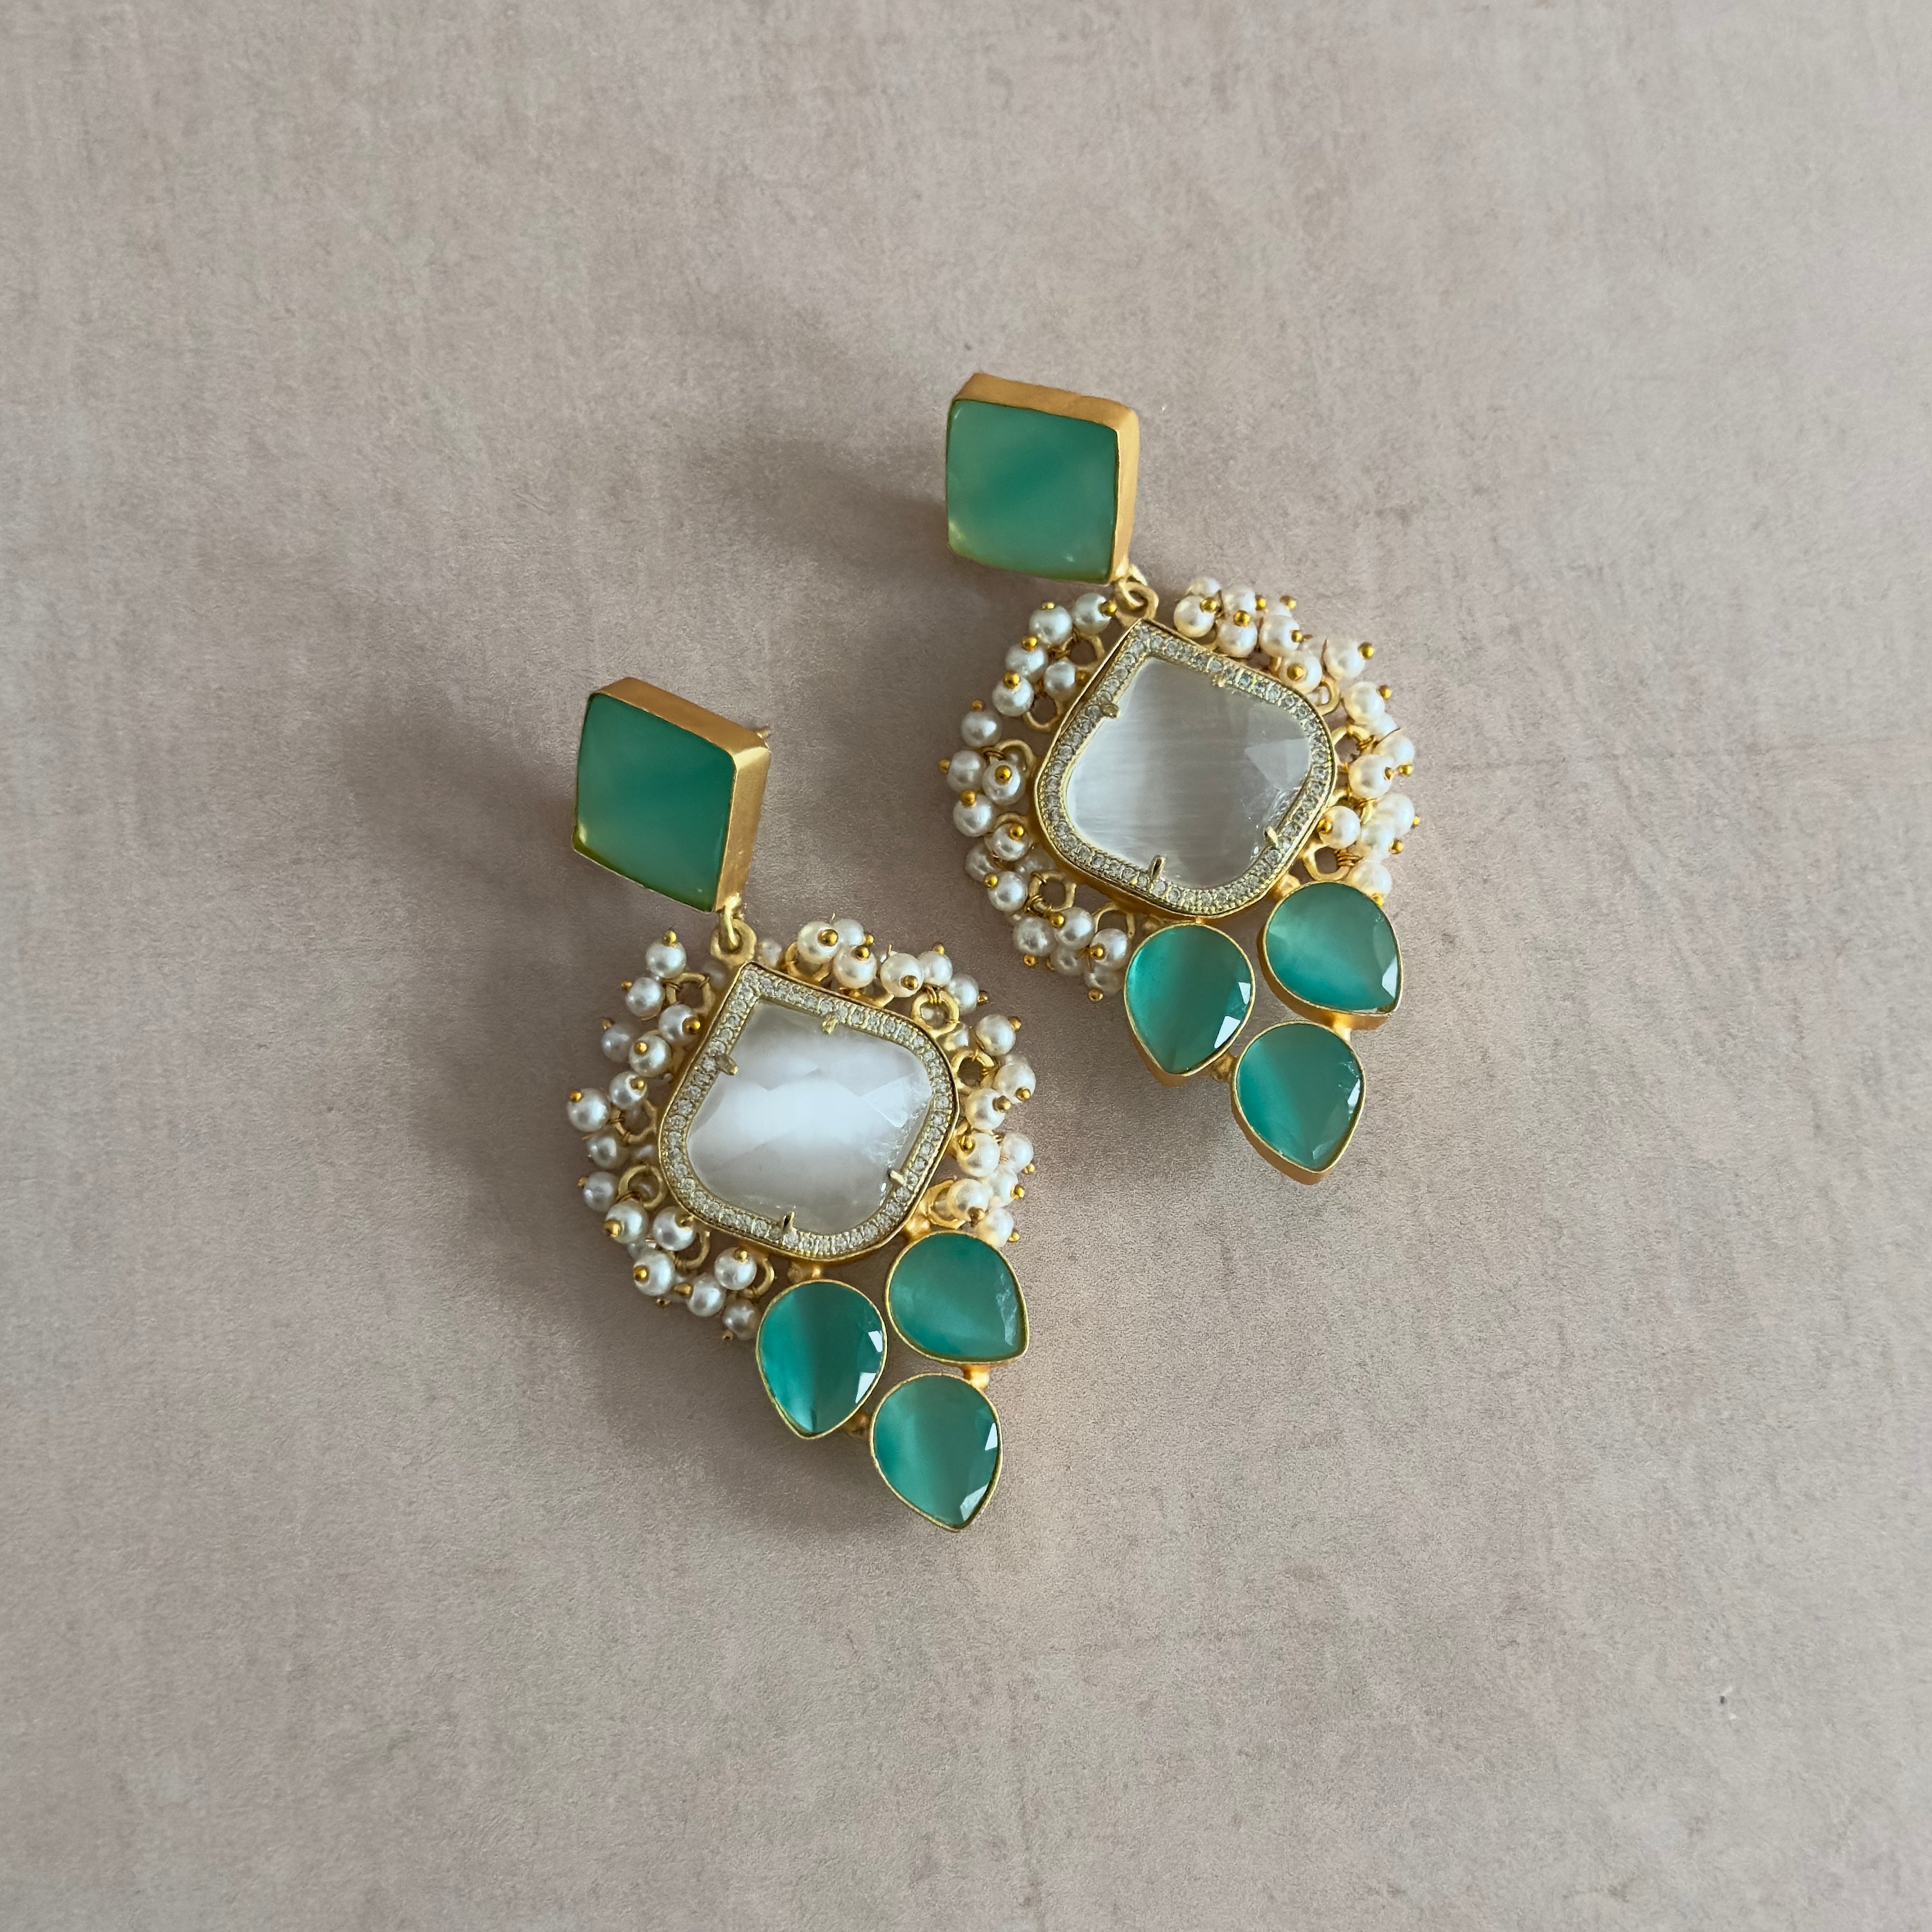 The Hijra Mint Earrings feature a stunning statement design that will be sure to turn heads. The vibrant mix of grey and mint adds a subtle yet eye-catching touch to any outfit. Elevate your style with these unique earrings!